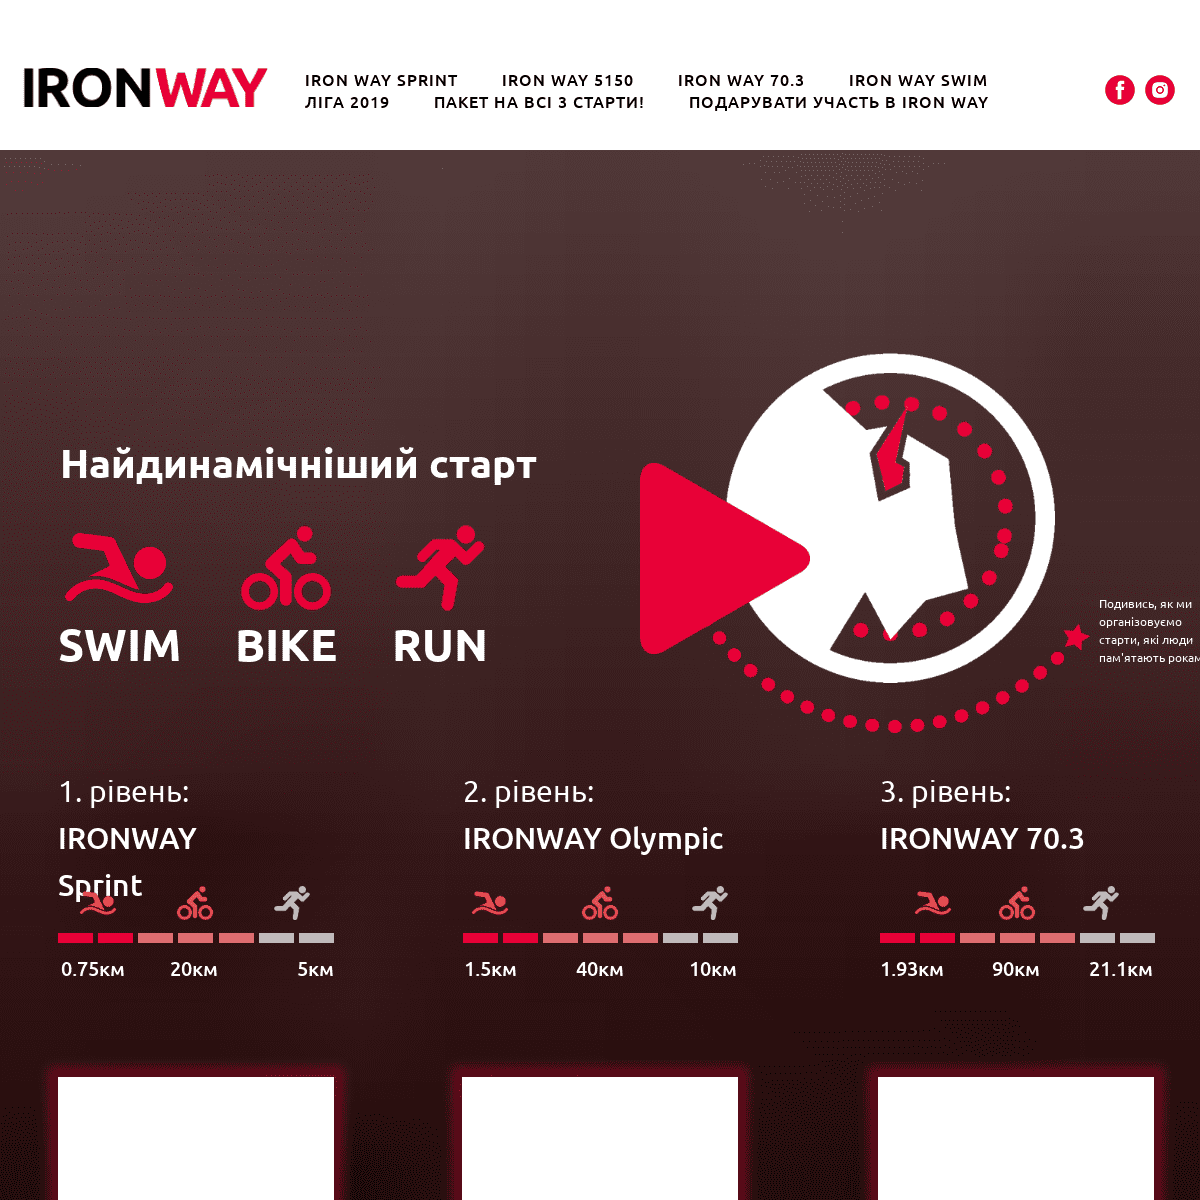 A complete backup of iron-way.com